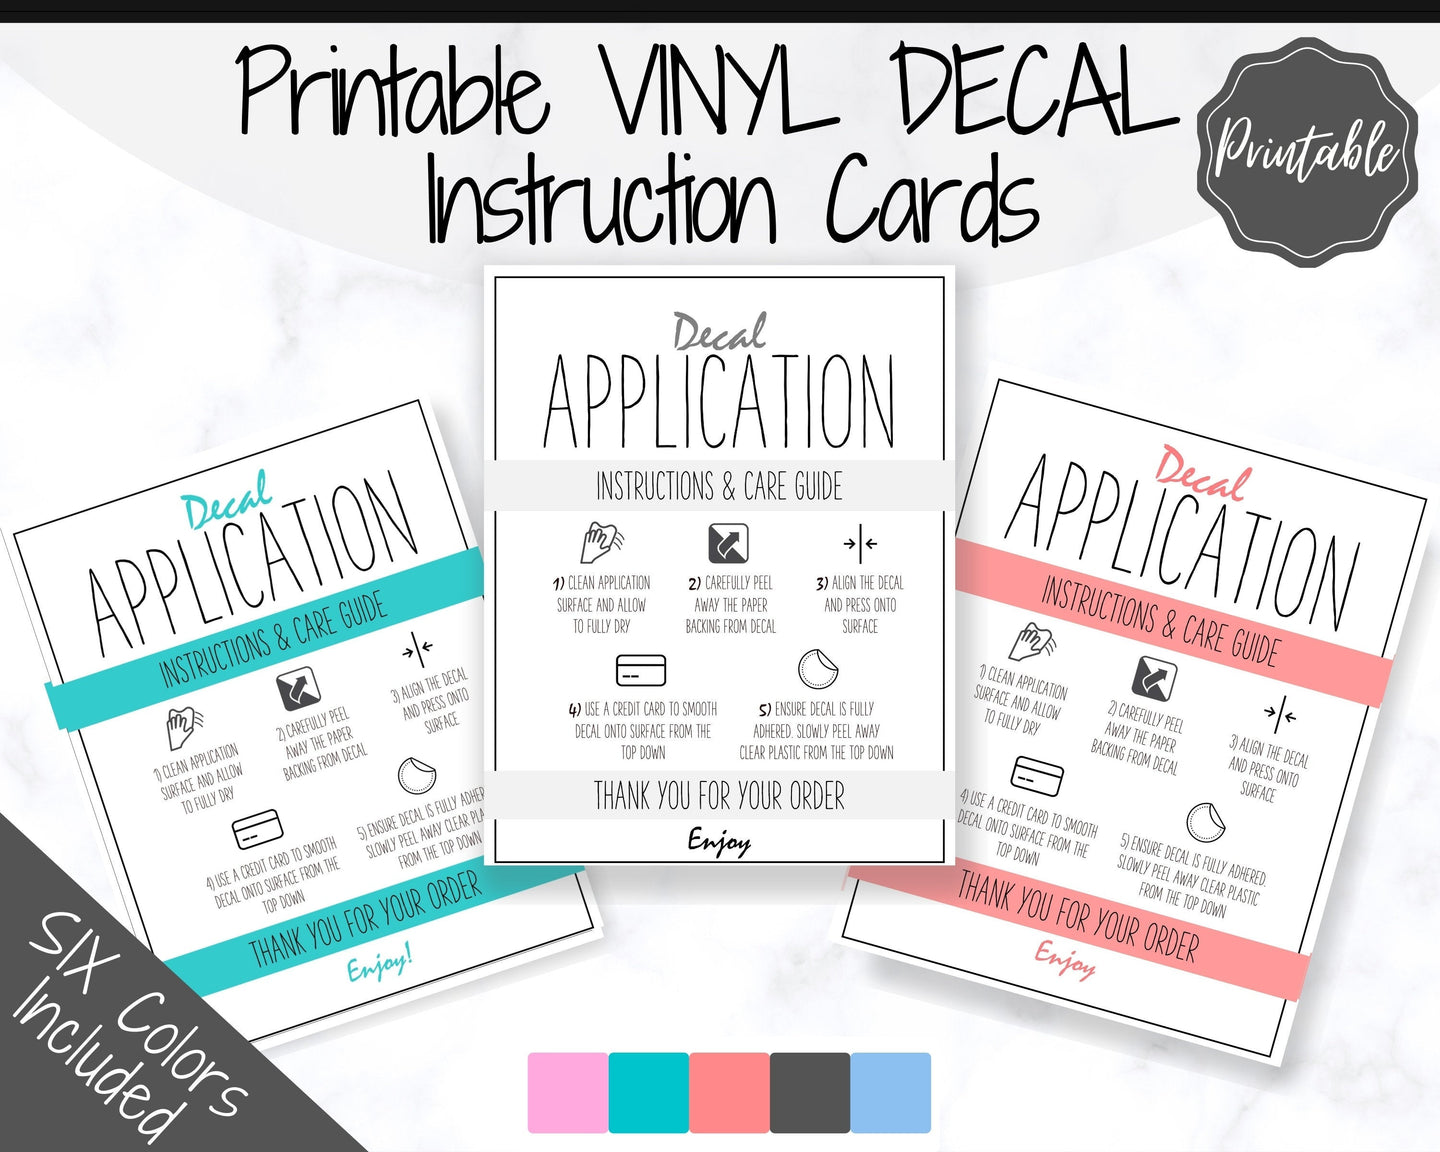 Printable Vinyl Decal Care Card Instructions. Decal Application Order Card, DIY Sticker Seller Packaging Label, Vinyl Decal Care Cards | Multicolor Bundle